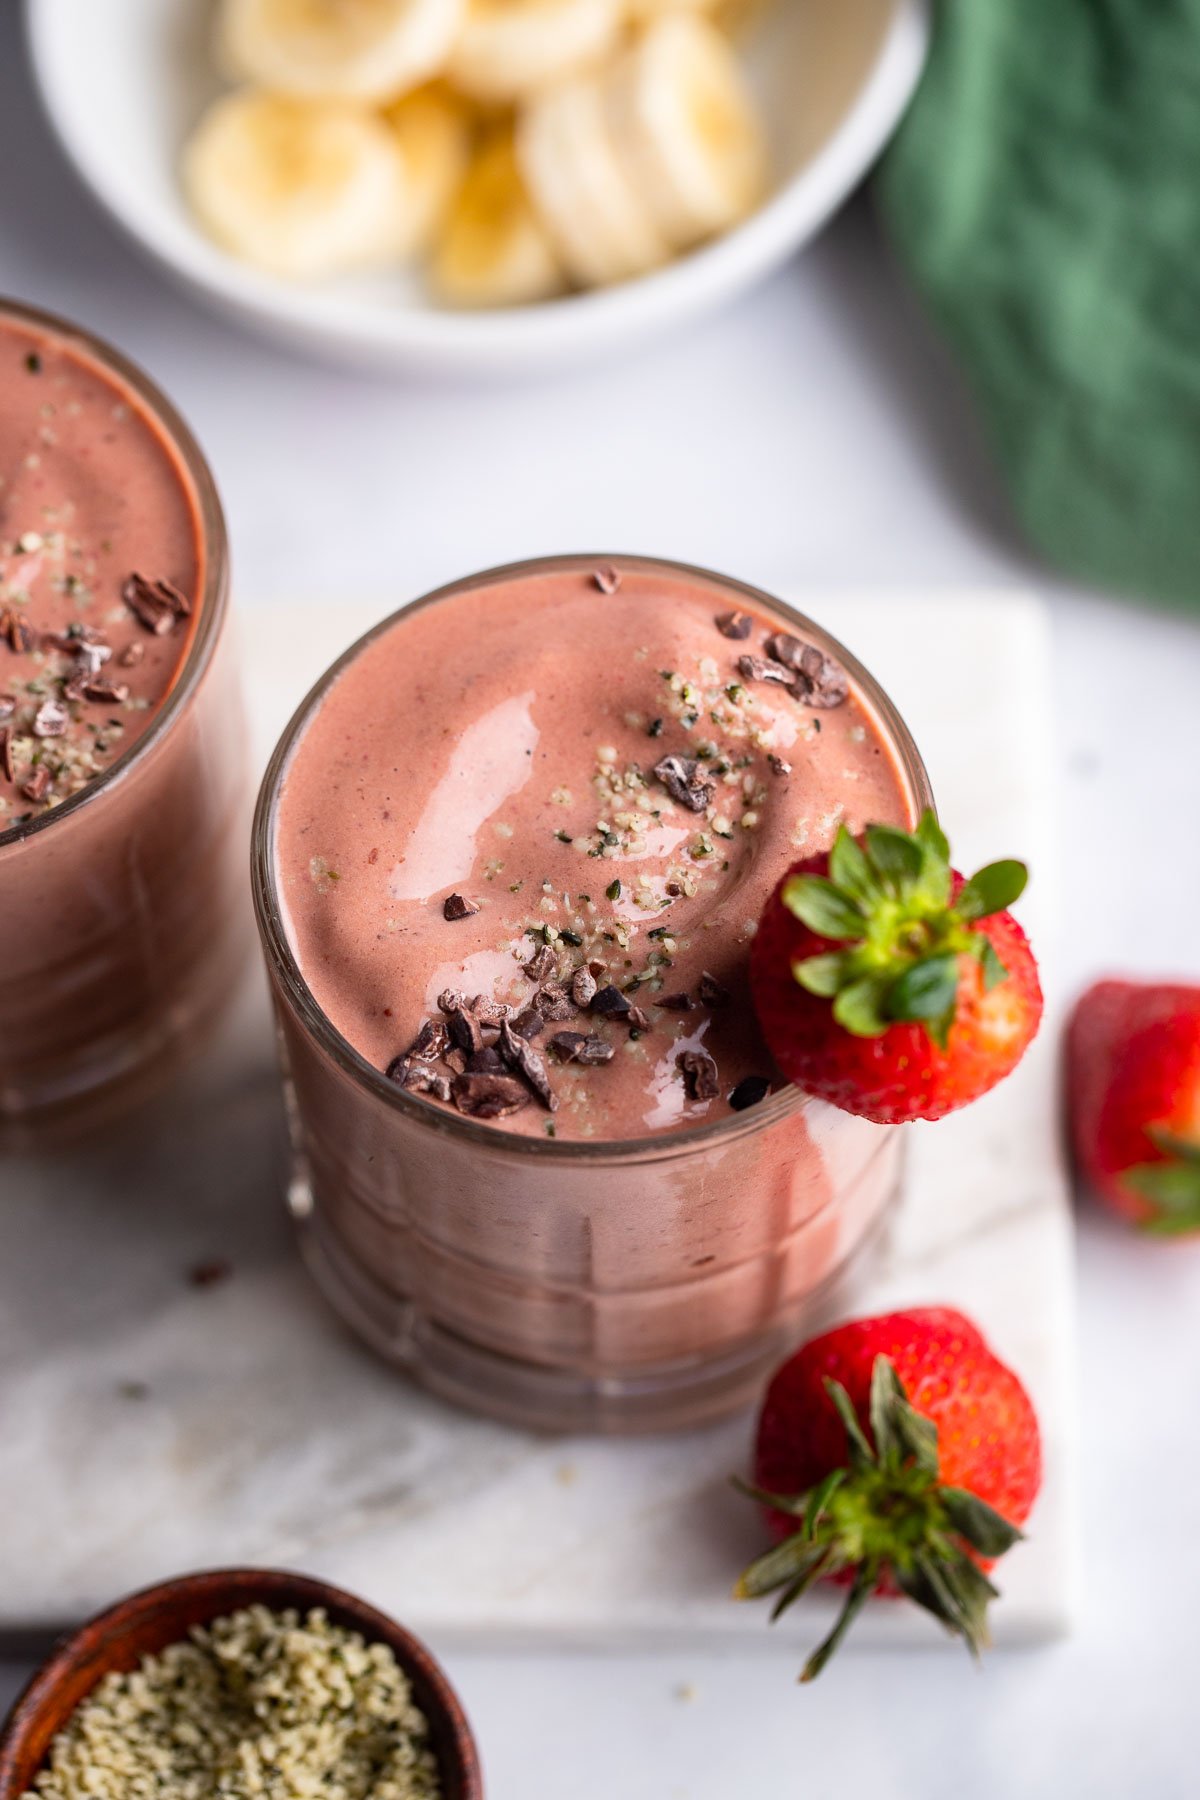 chocolate, strawberry, banana milkshake, garnished with hemp hearts and cocoa beans in a glass.